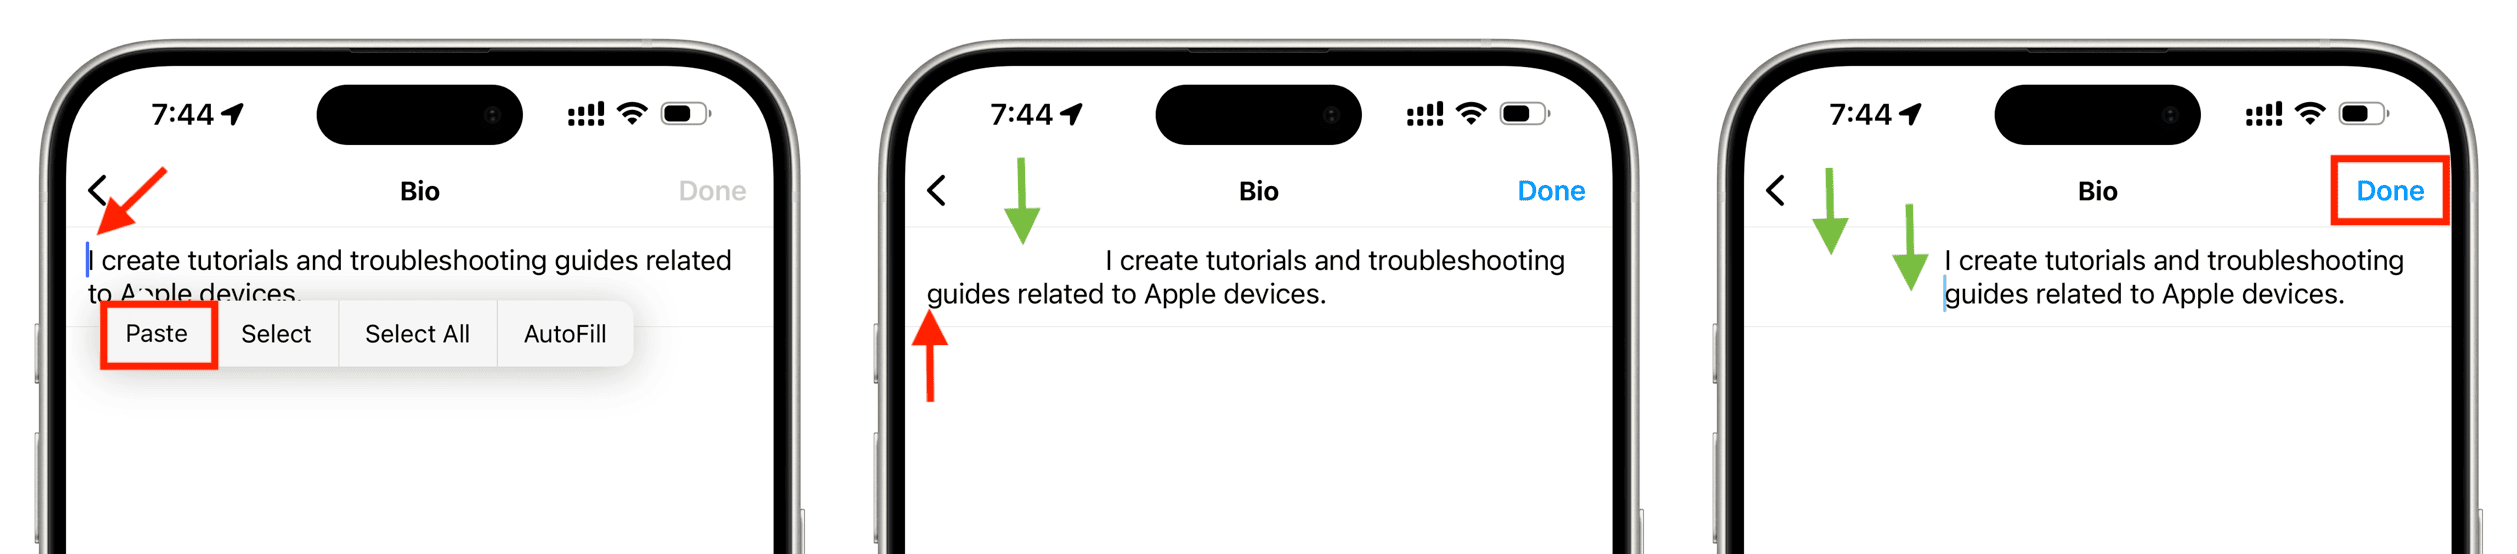 Add spaces to align your Instagram bio in the center